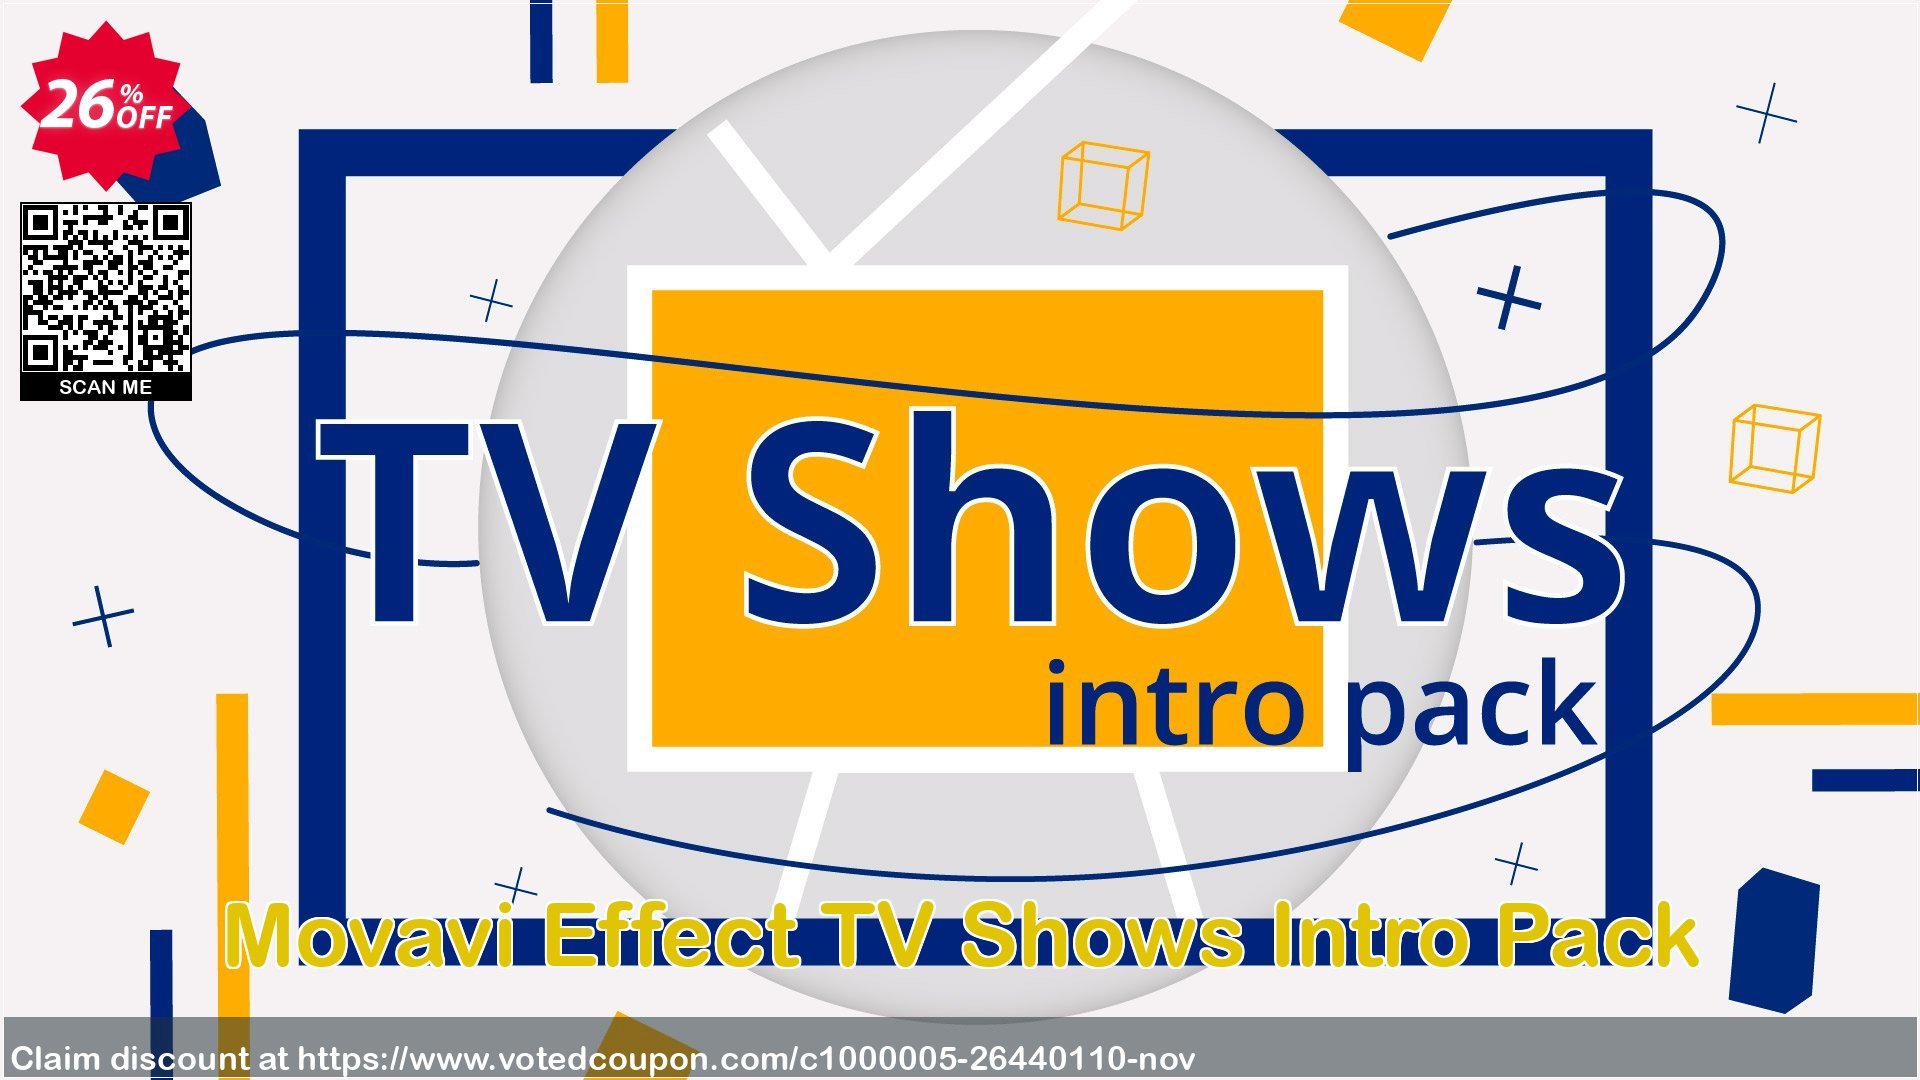 Movavi Effect TV Shows Intro Pack Coupon Code Apr 2024, 26% OFF - VotedCoupon